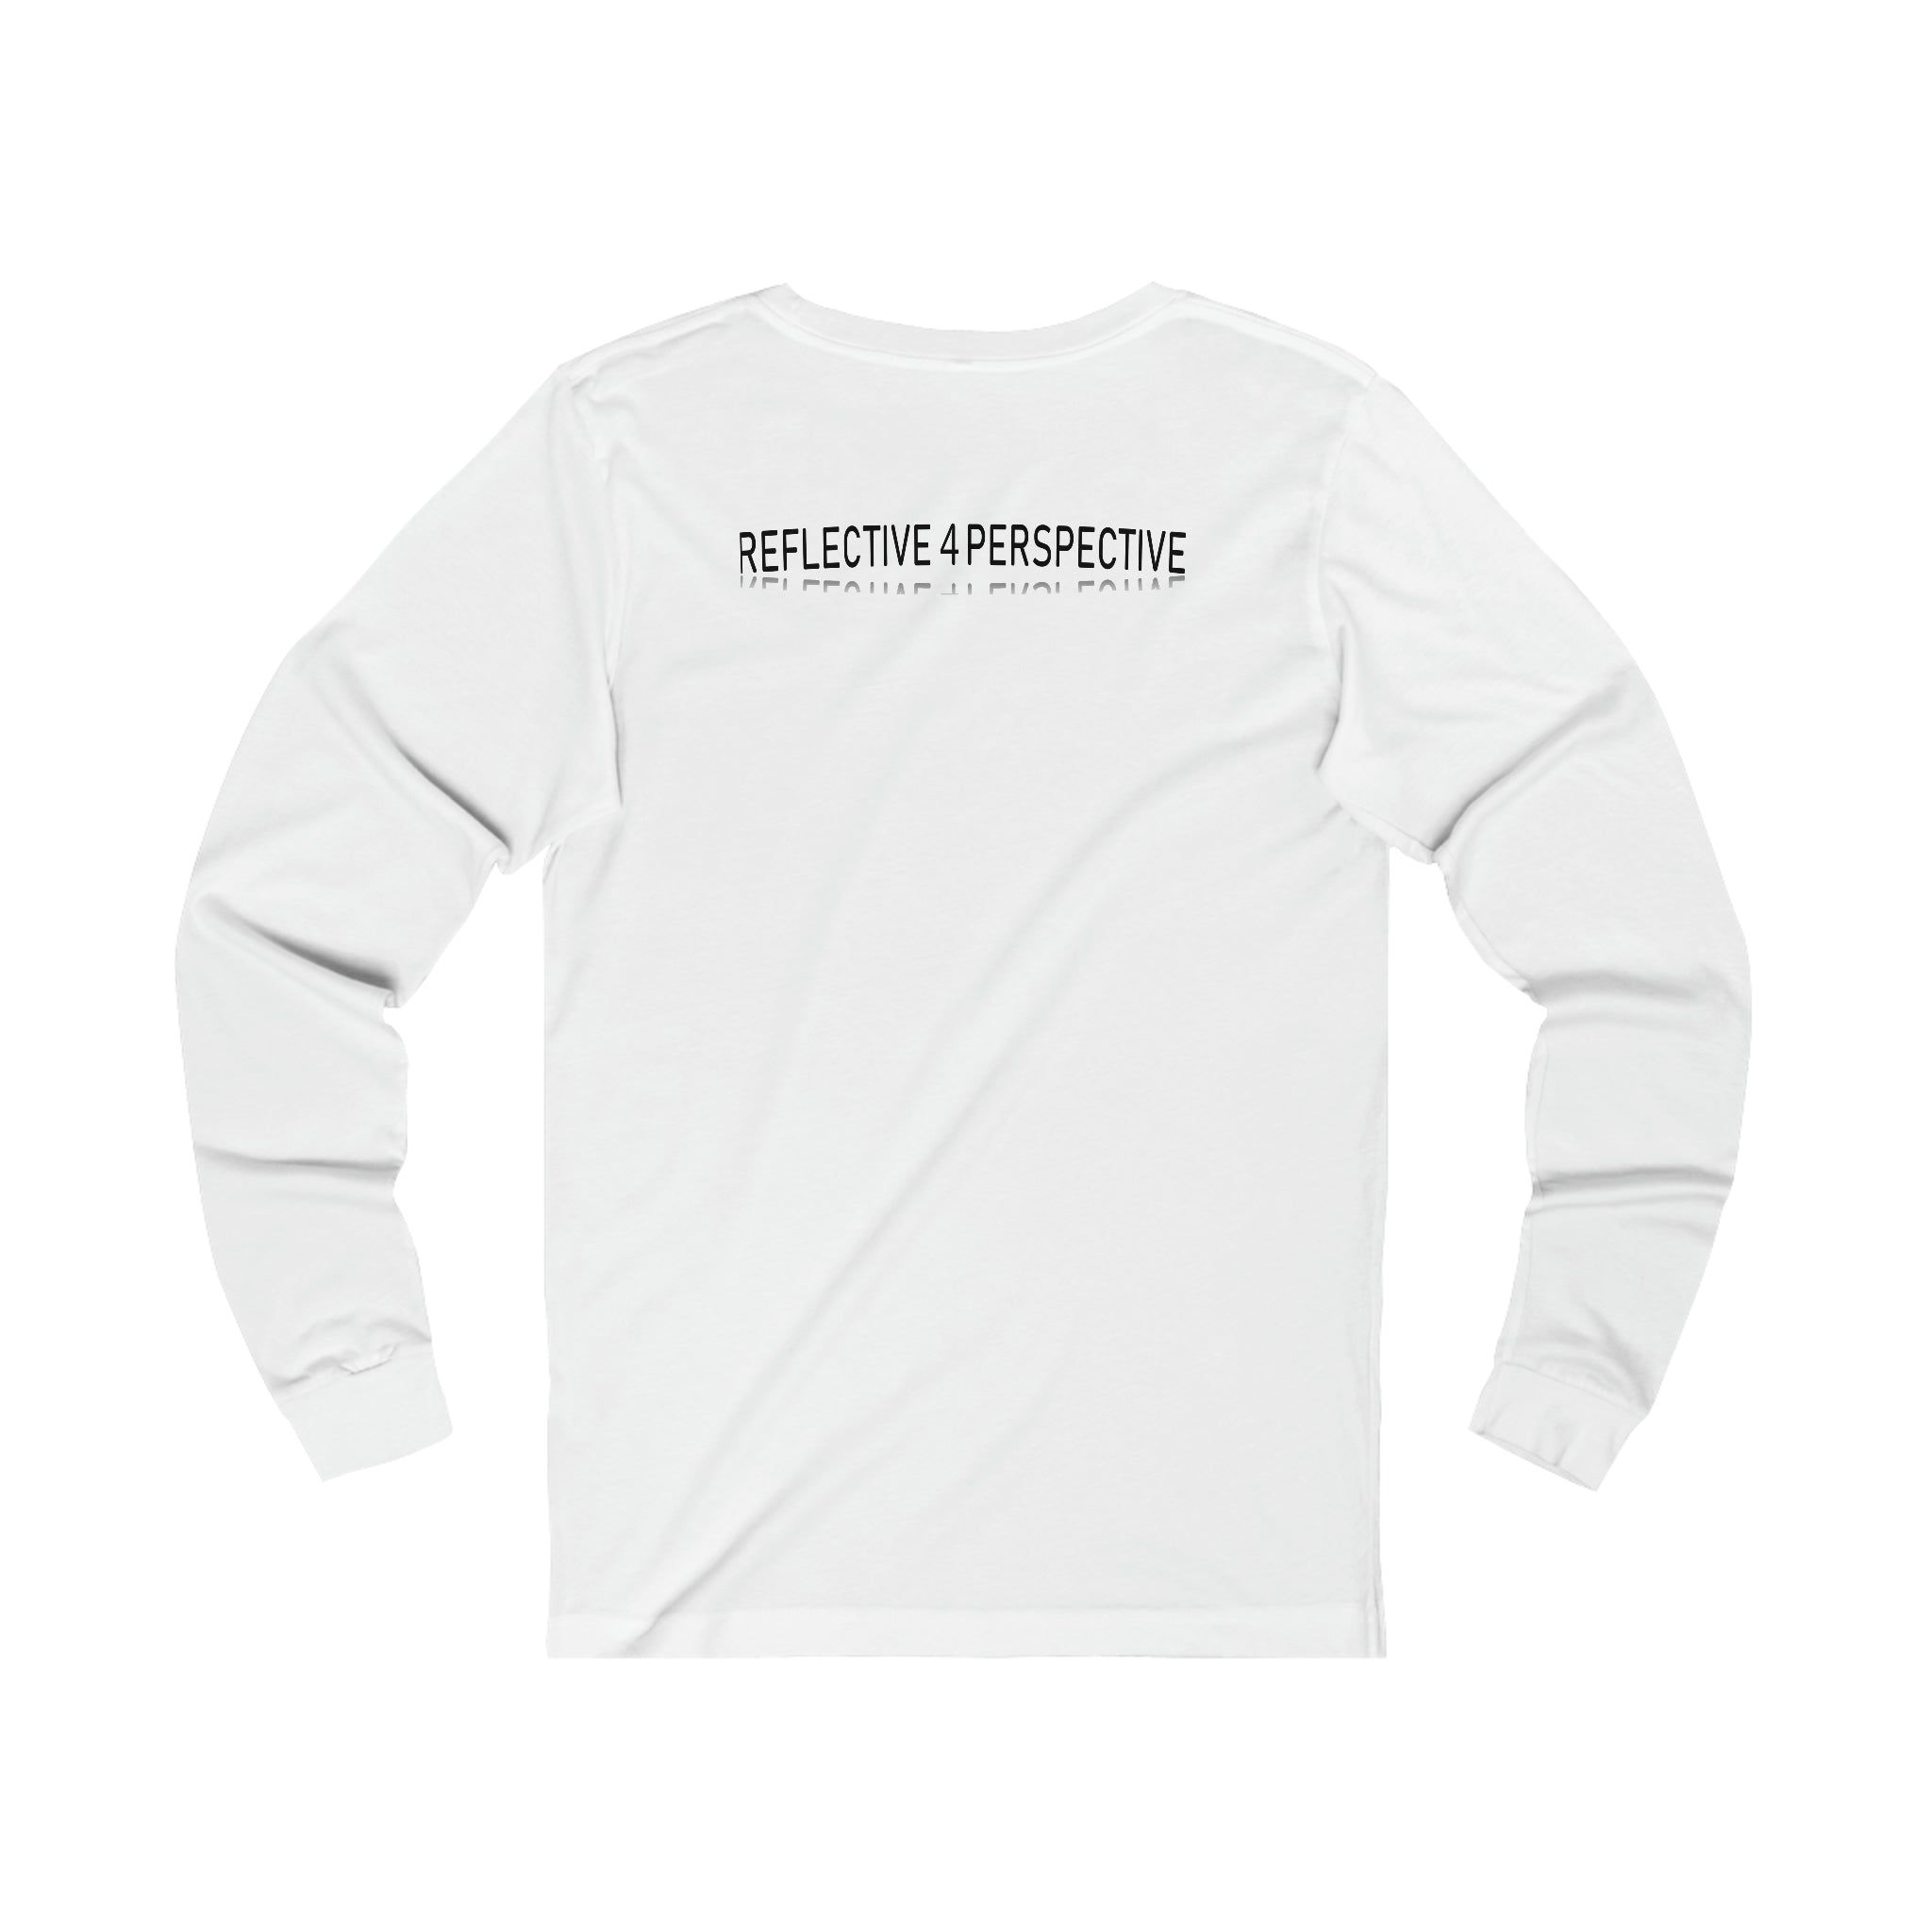 "Everything Will be Alright" Women's Long Sleeve Tee